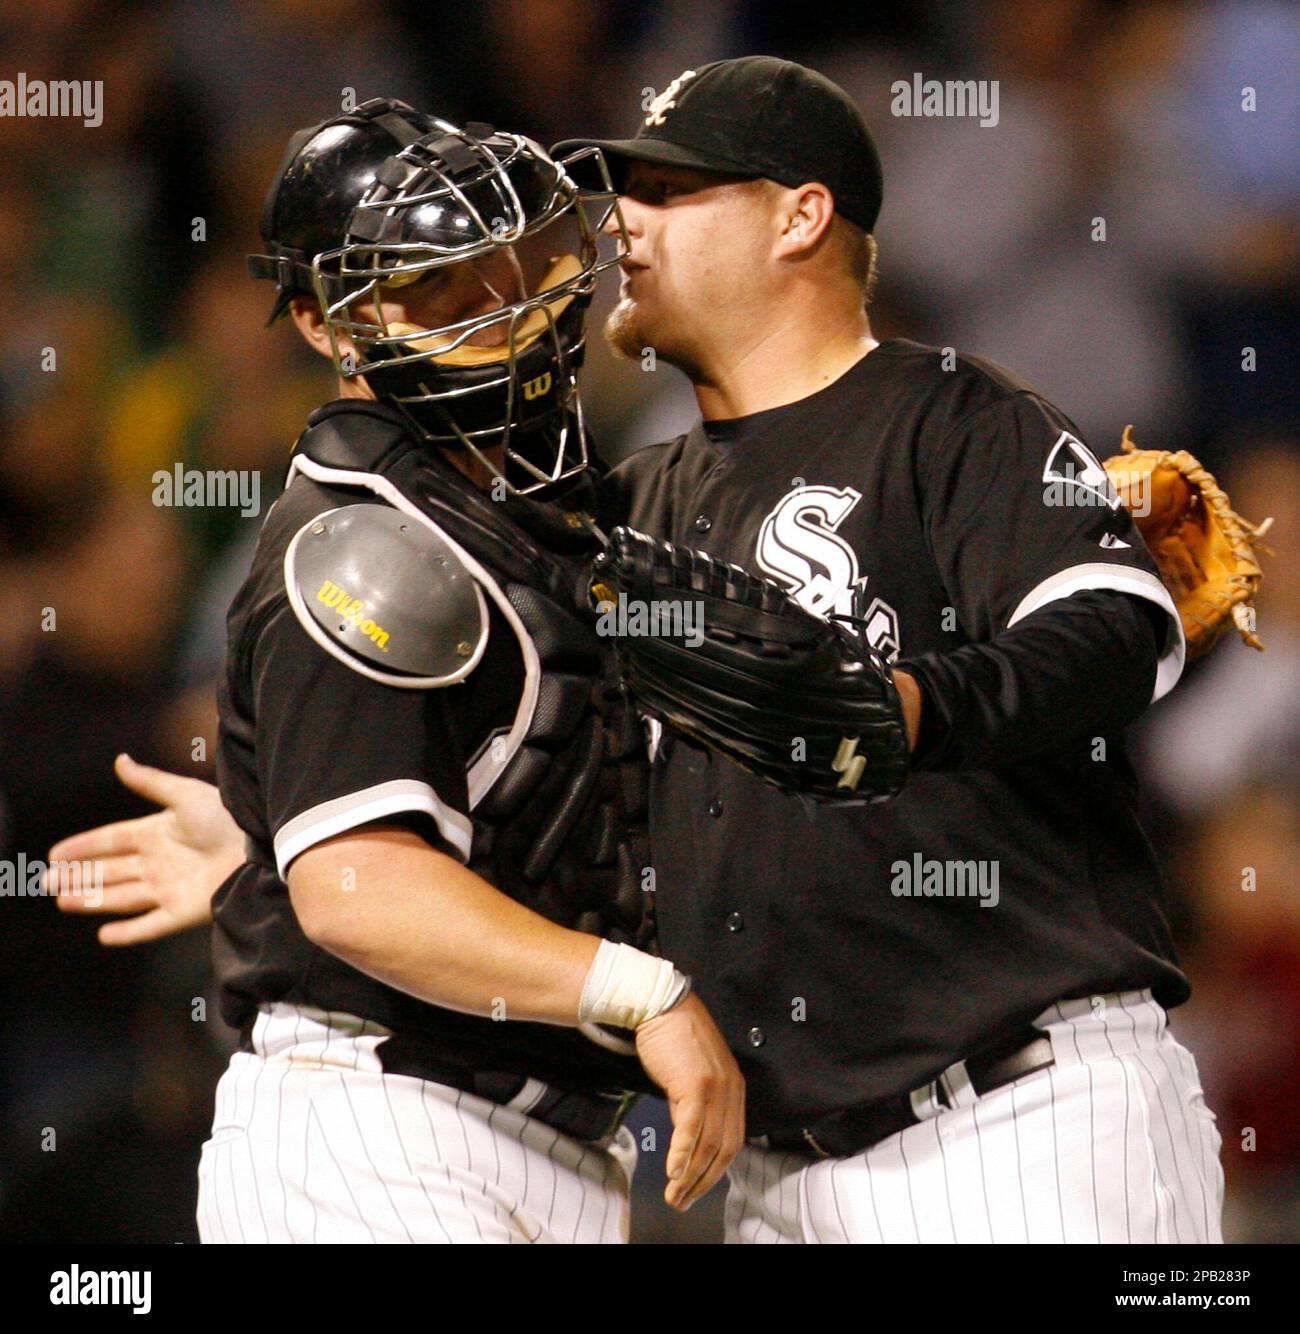 Chicago White Sox closer Bobby Jenks, right, celebrates with catcher Toby  Hall after the White Sox beat the Detroit Tigers, 5-2, in a baseball game,  Friday, Sept. 28, 2007, in Chicago.(AP Photo/Nam